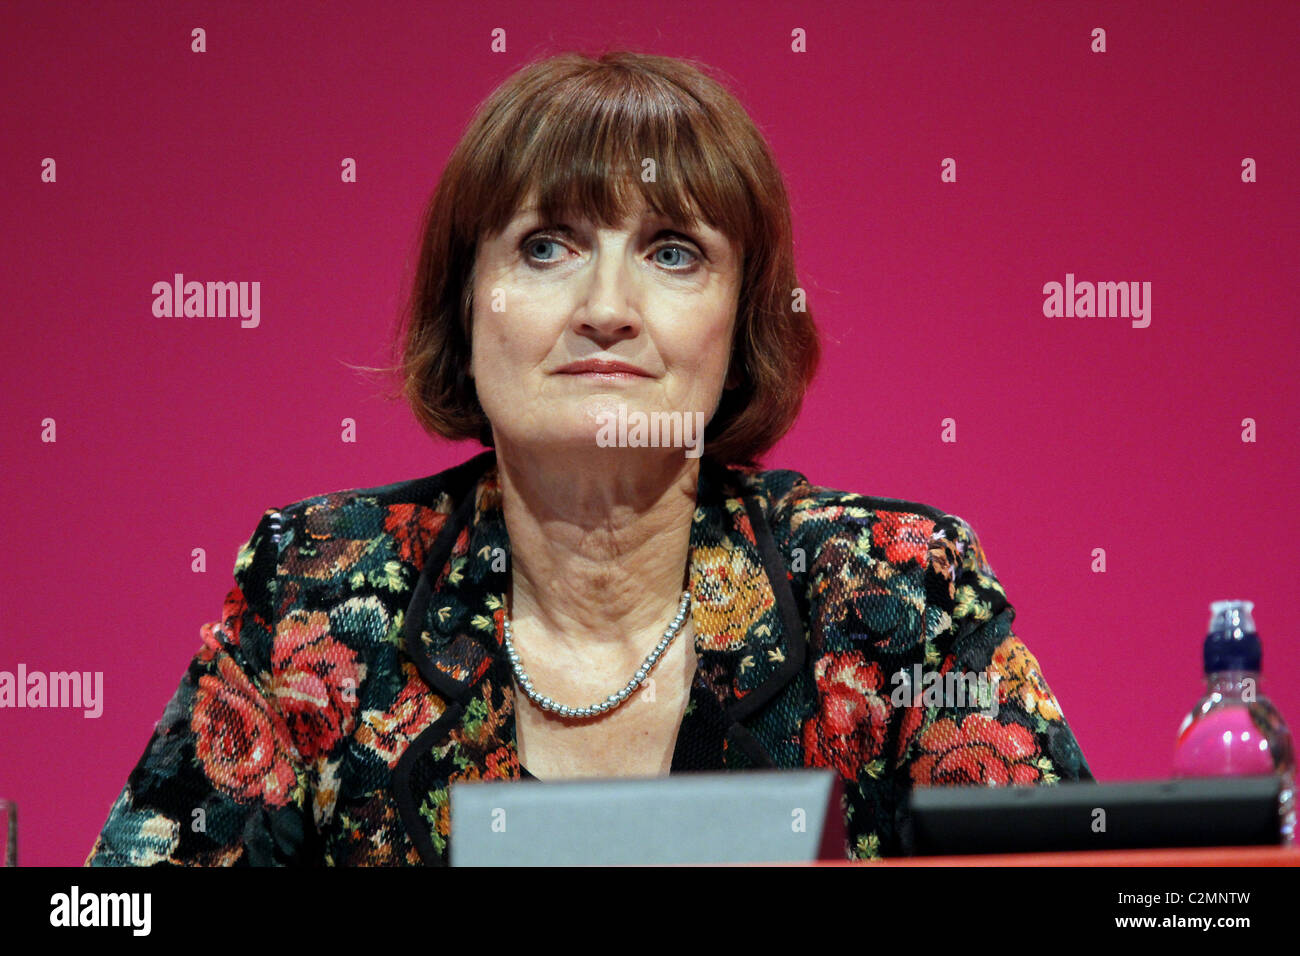 TESSA JOWELL MP LABOUR PARTY 29 September 2010 MANCHESTER CENTRAL MANCHESTER ENGLAND Stock Photo